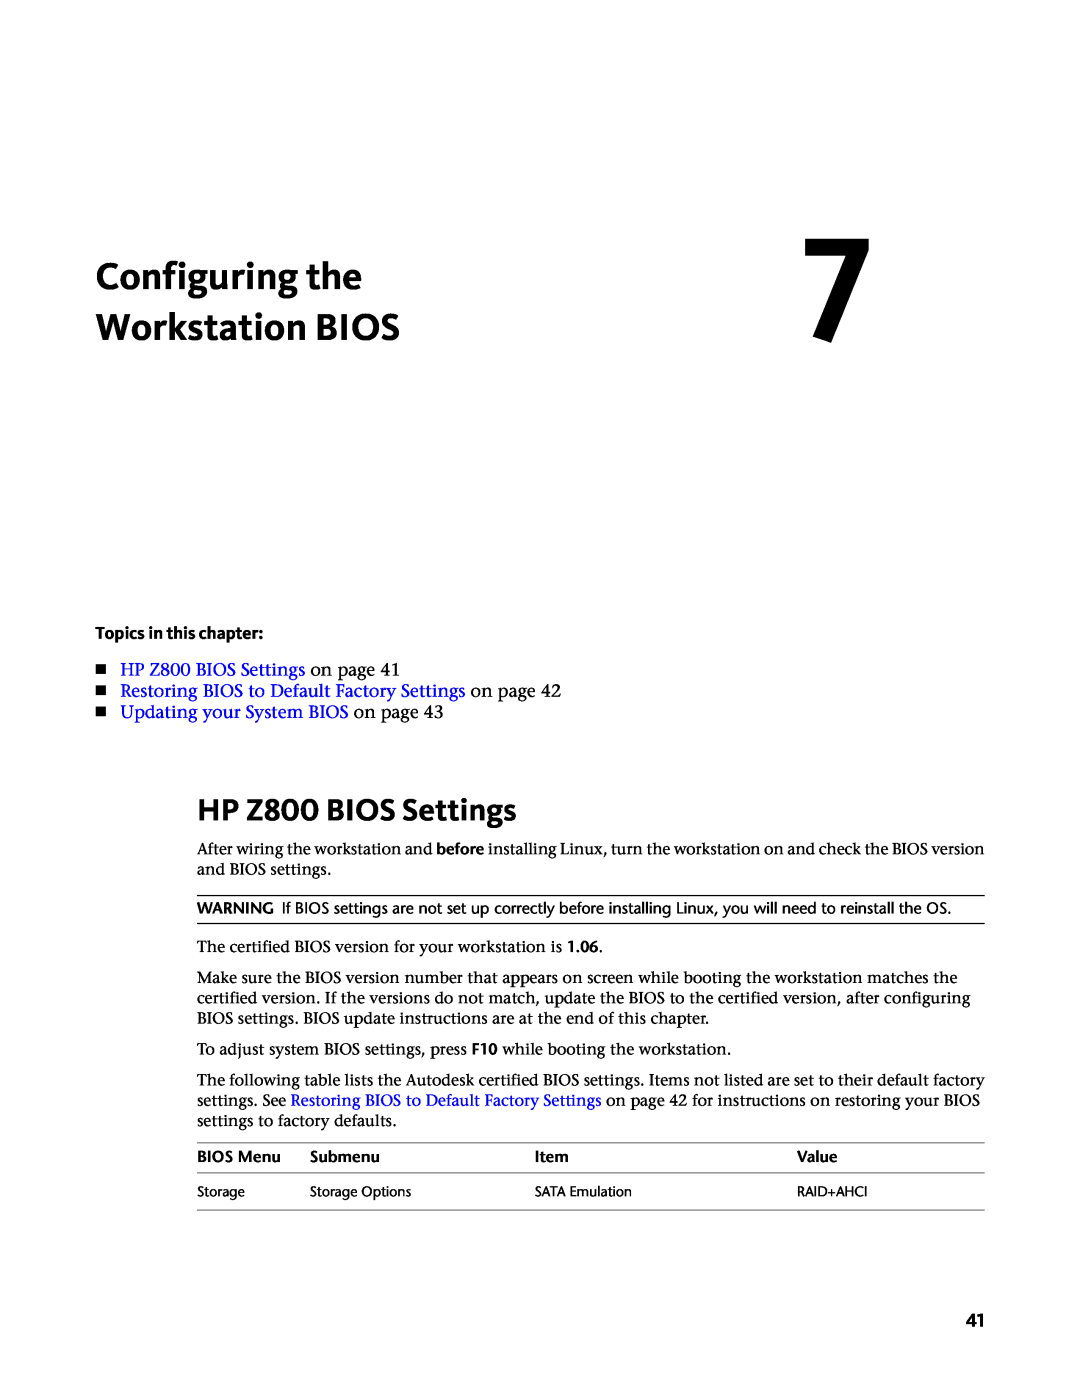 HP manual Configuring the, Workstation BIOS, HP Z800 BIOS Settings on page, Updating your System BIOS on page 